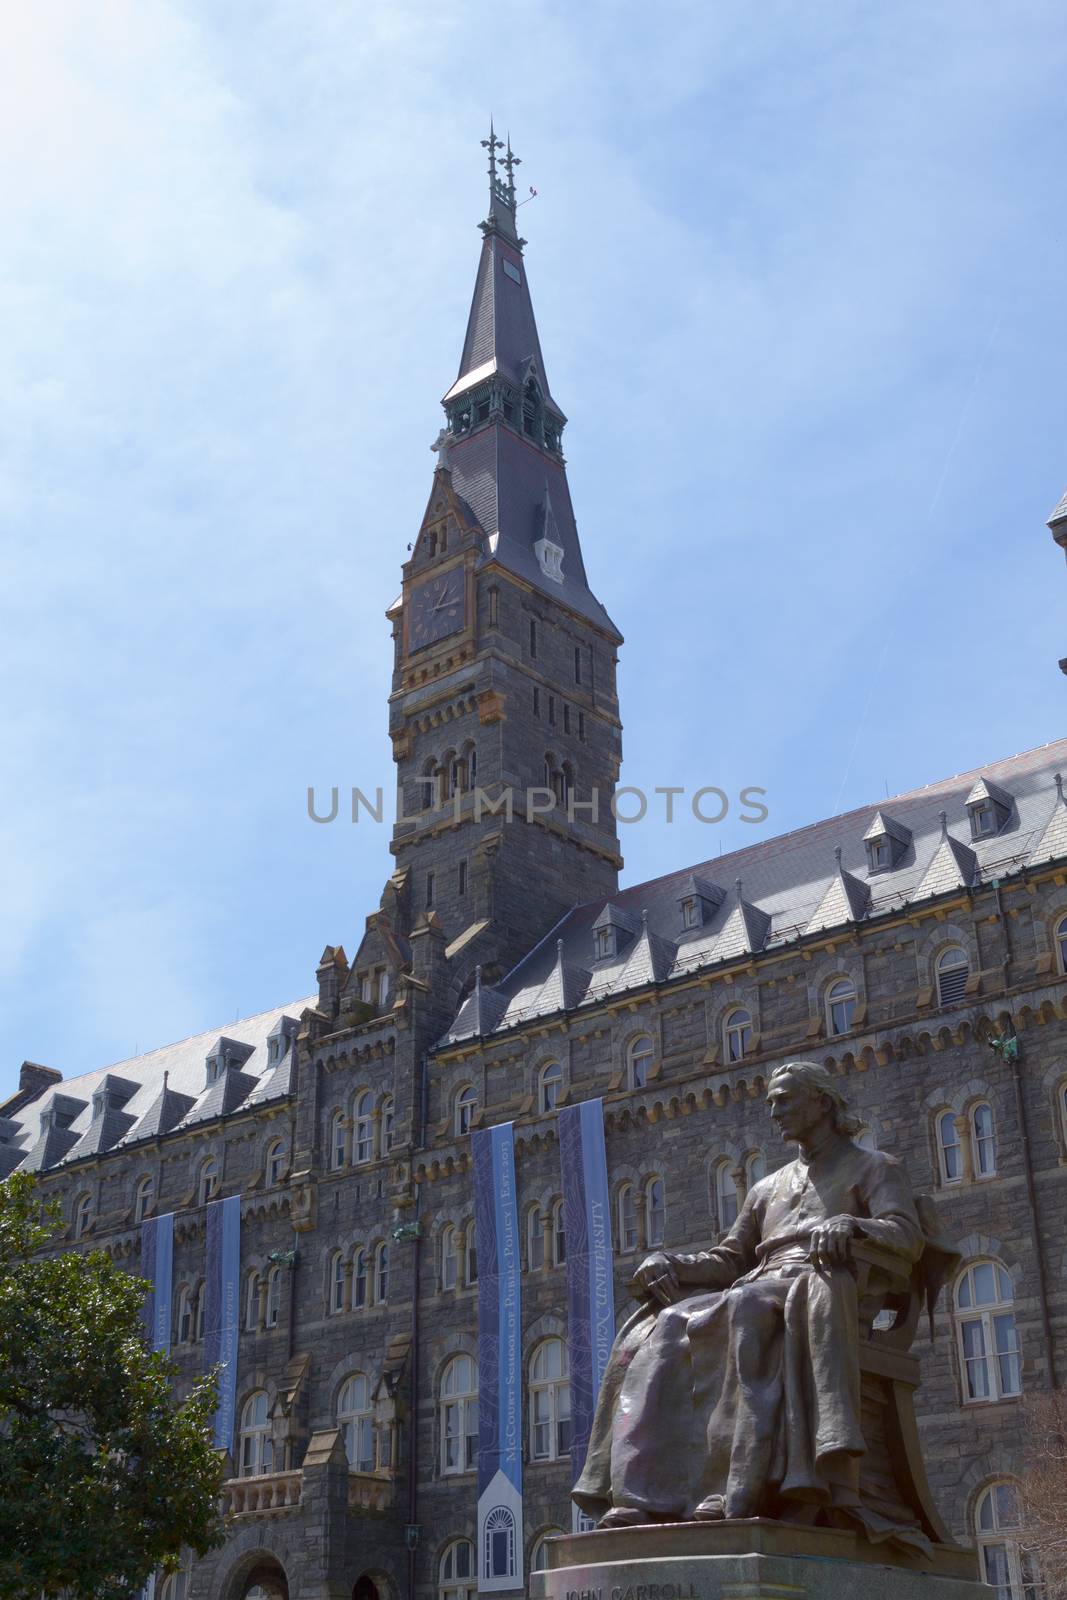 Georgetown University was founded by John Carrol in 1789